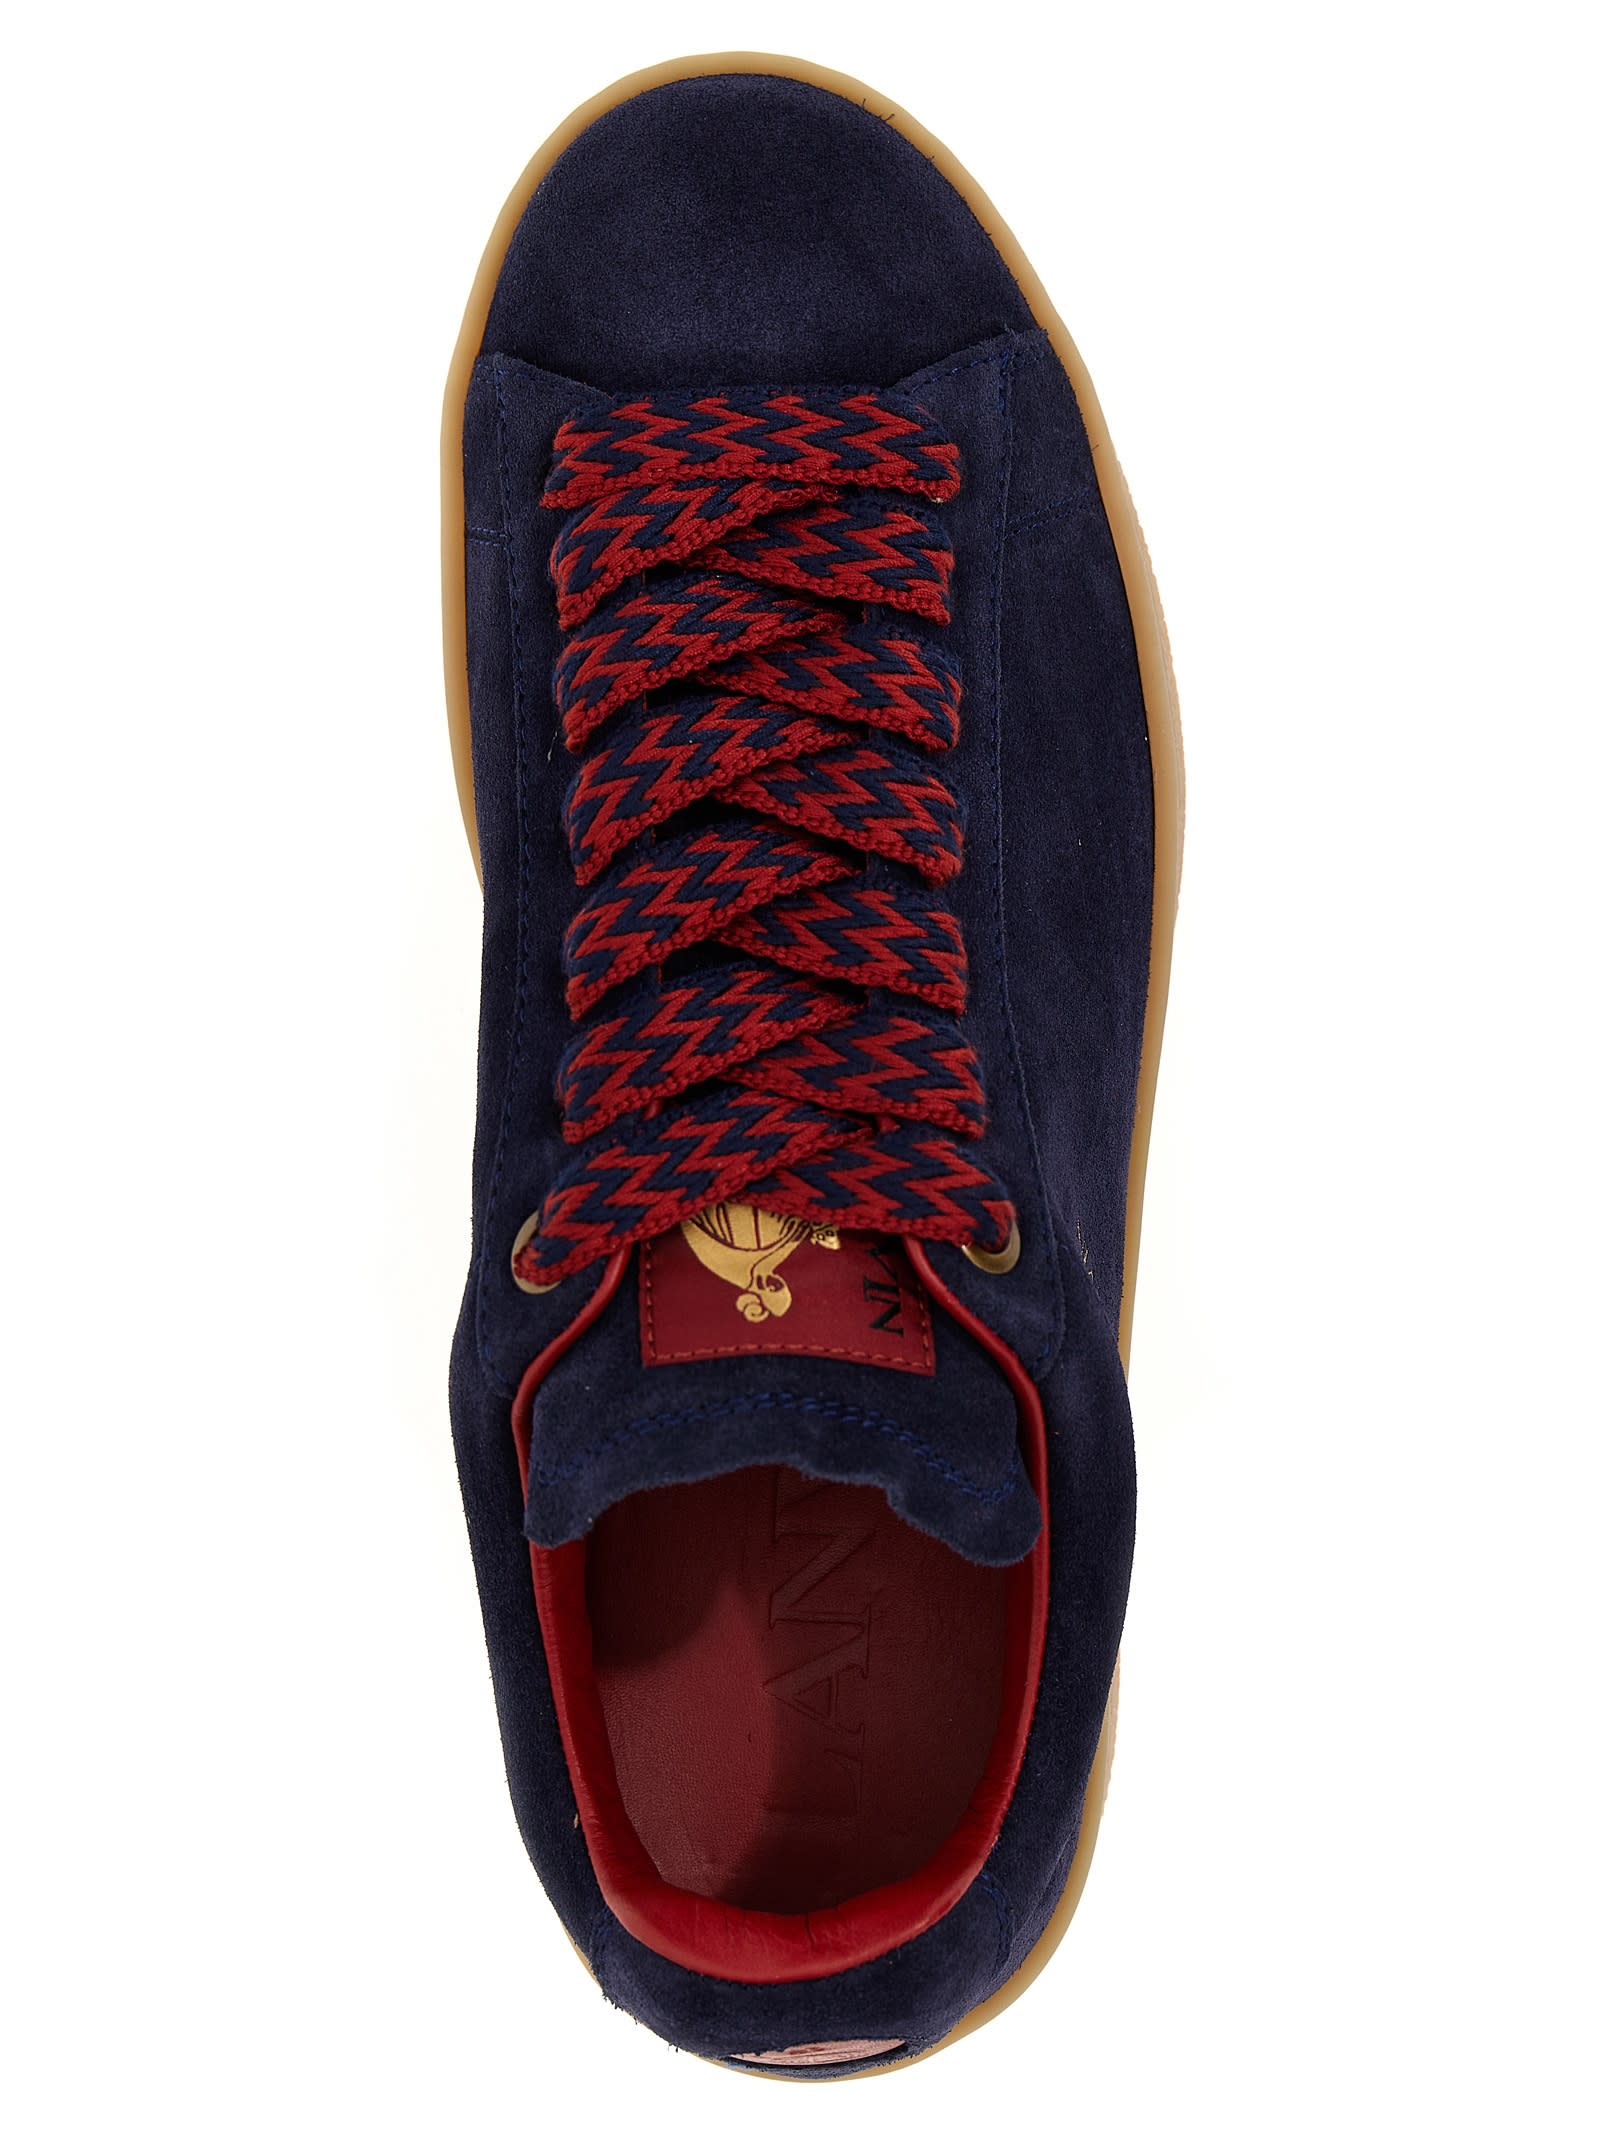 Shop Lanvin Lite Curb Sneakers In Navy Blue/red